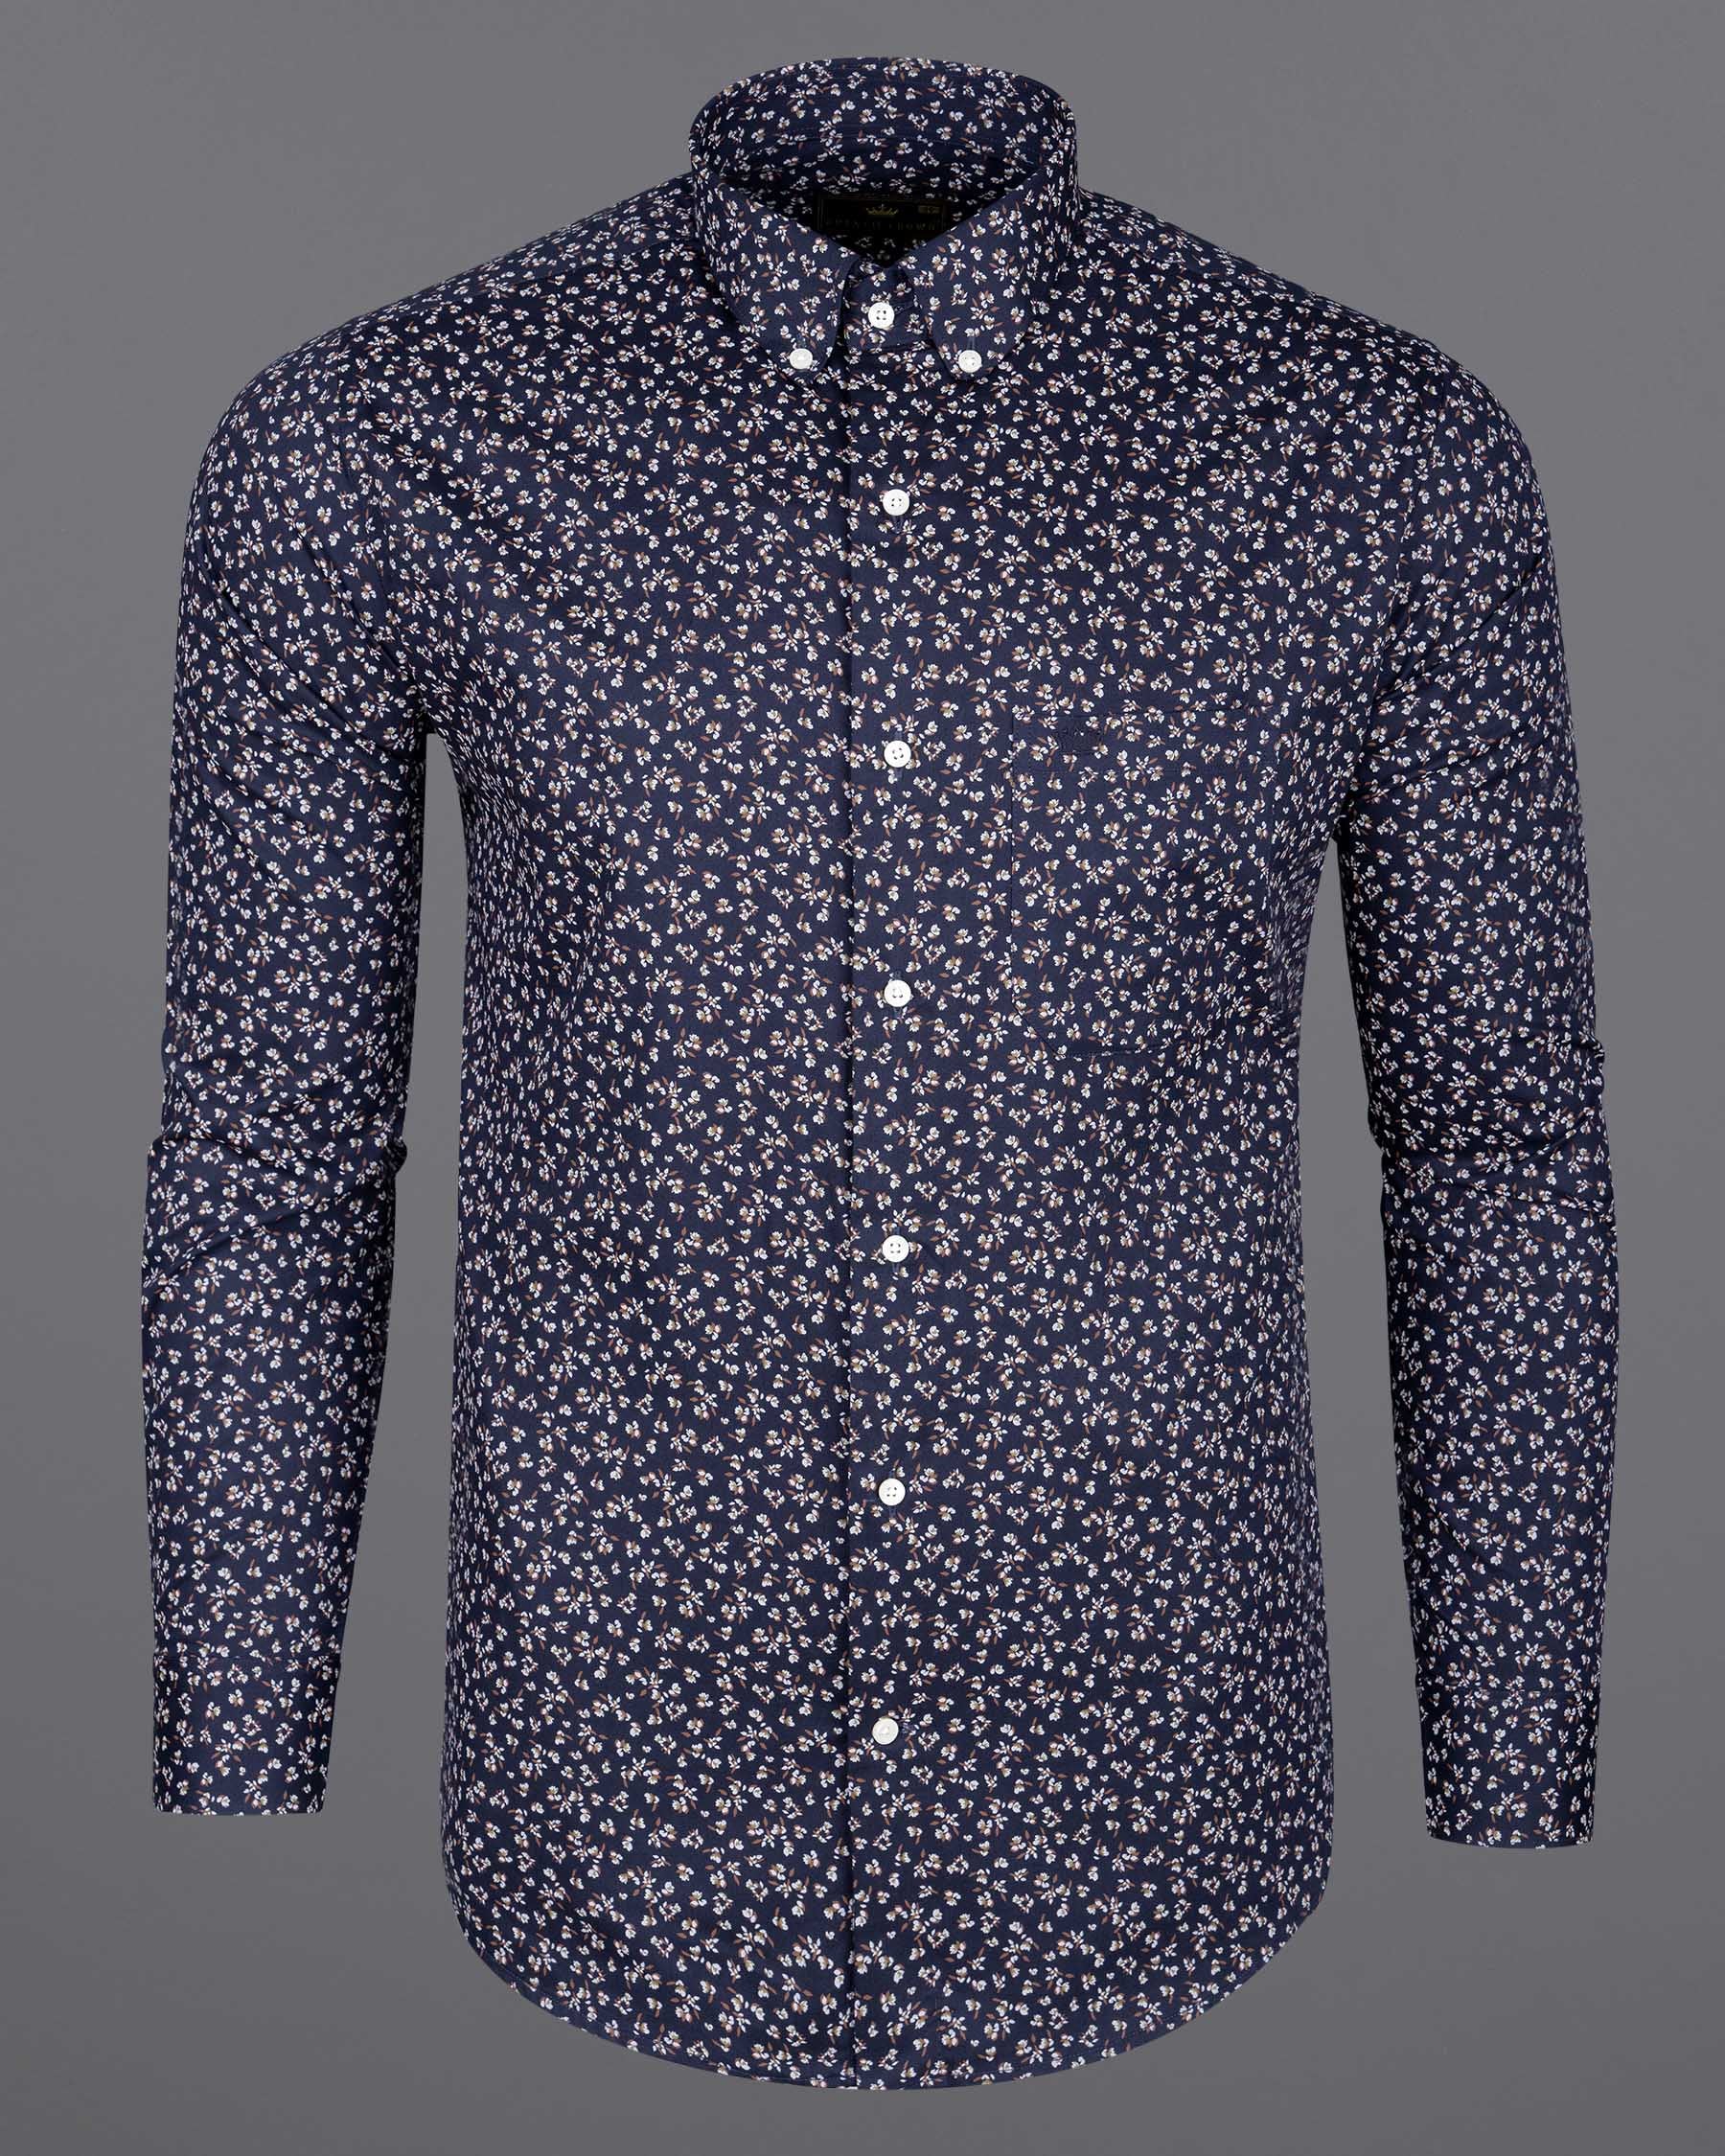 Mirage Blue and White Floral Printed Super Soft Premium Cotton Shirt 6710-BD-38,6710-BD-38,6710-BD-39,6710-BD-39,6710-BD-40,6710-BD-40,6710-BD-42,6710-BD-42,6710-BD-44,6710-BD-44,6710-BD-46,6710-BD-46,6710-BD-48,6710-BD-48,6710-BD-50,6710-BD-50,6710-BD-52,6710-BD-52